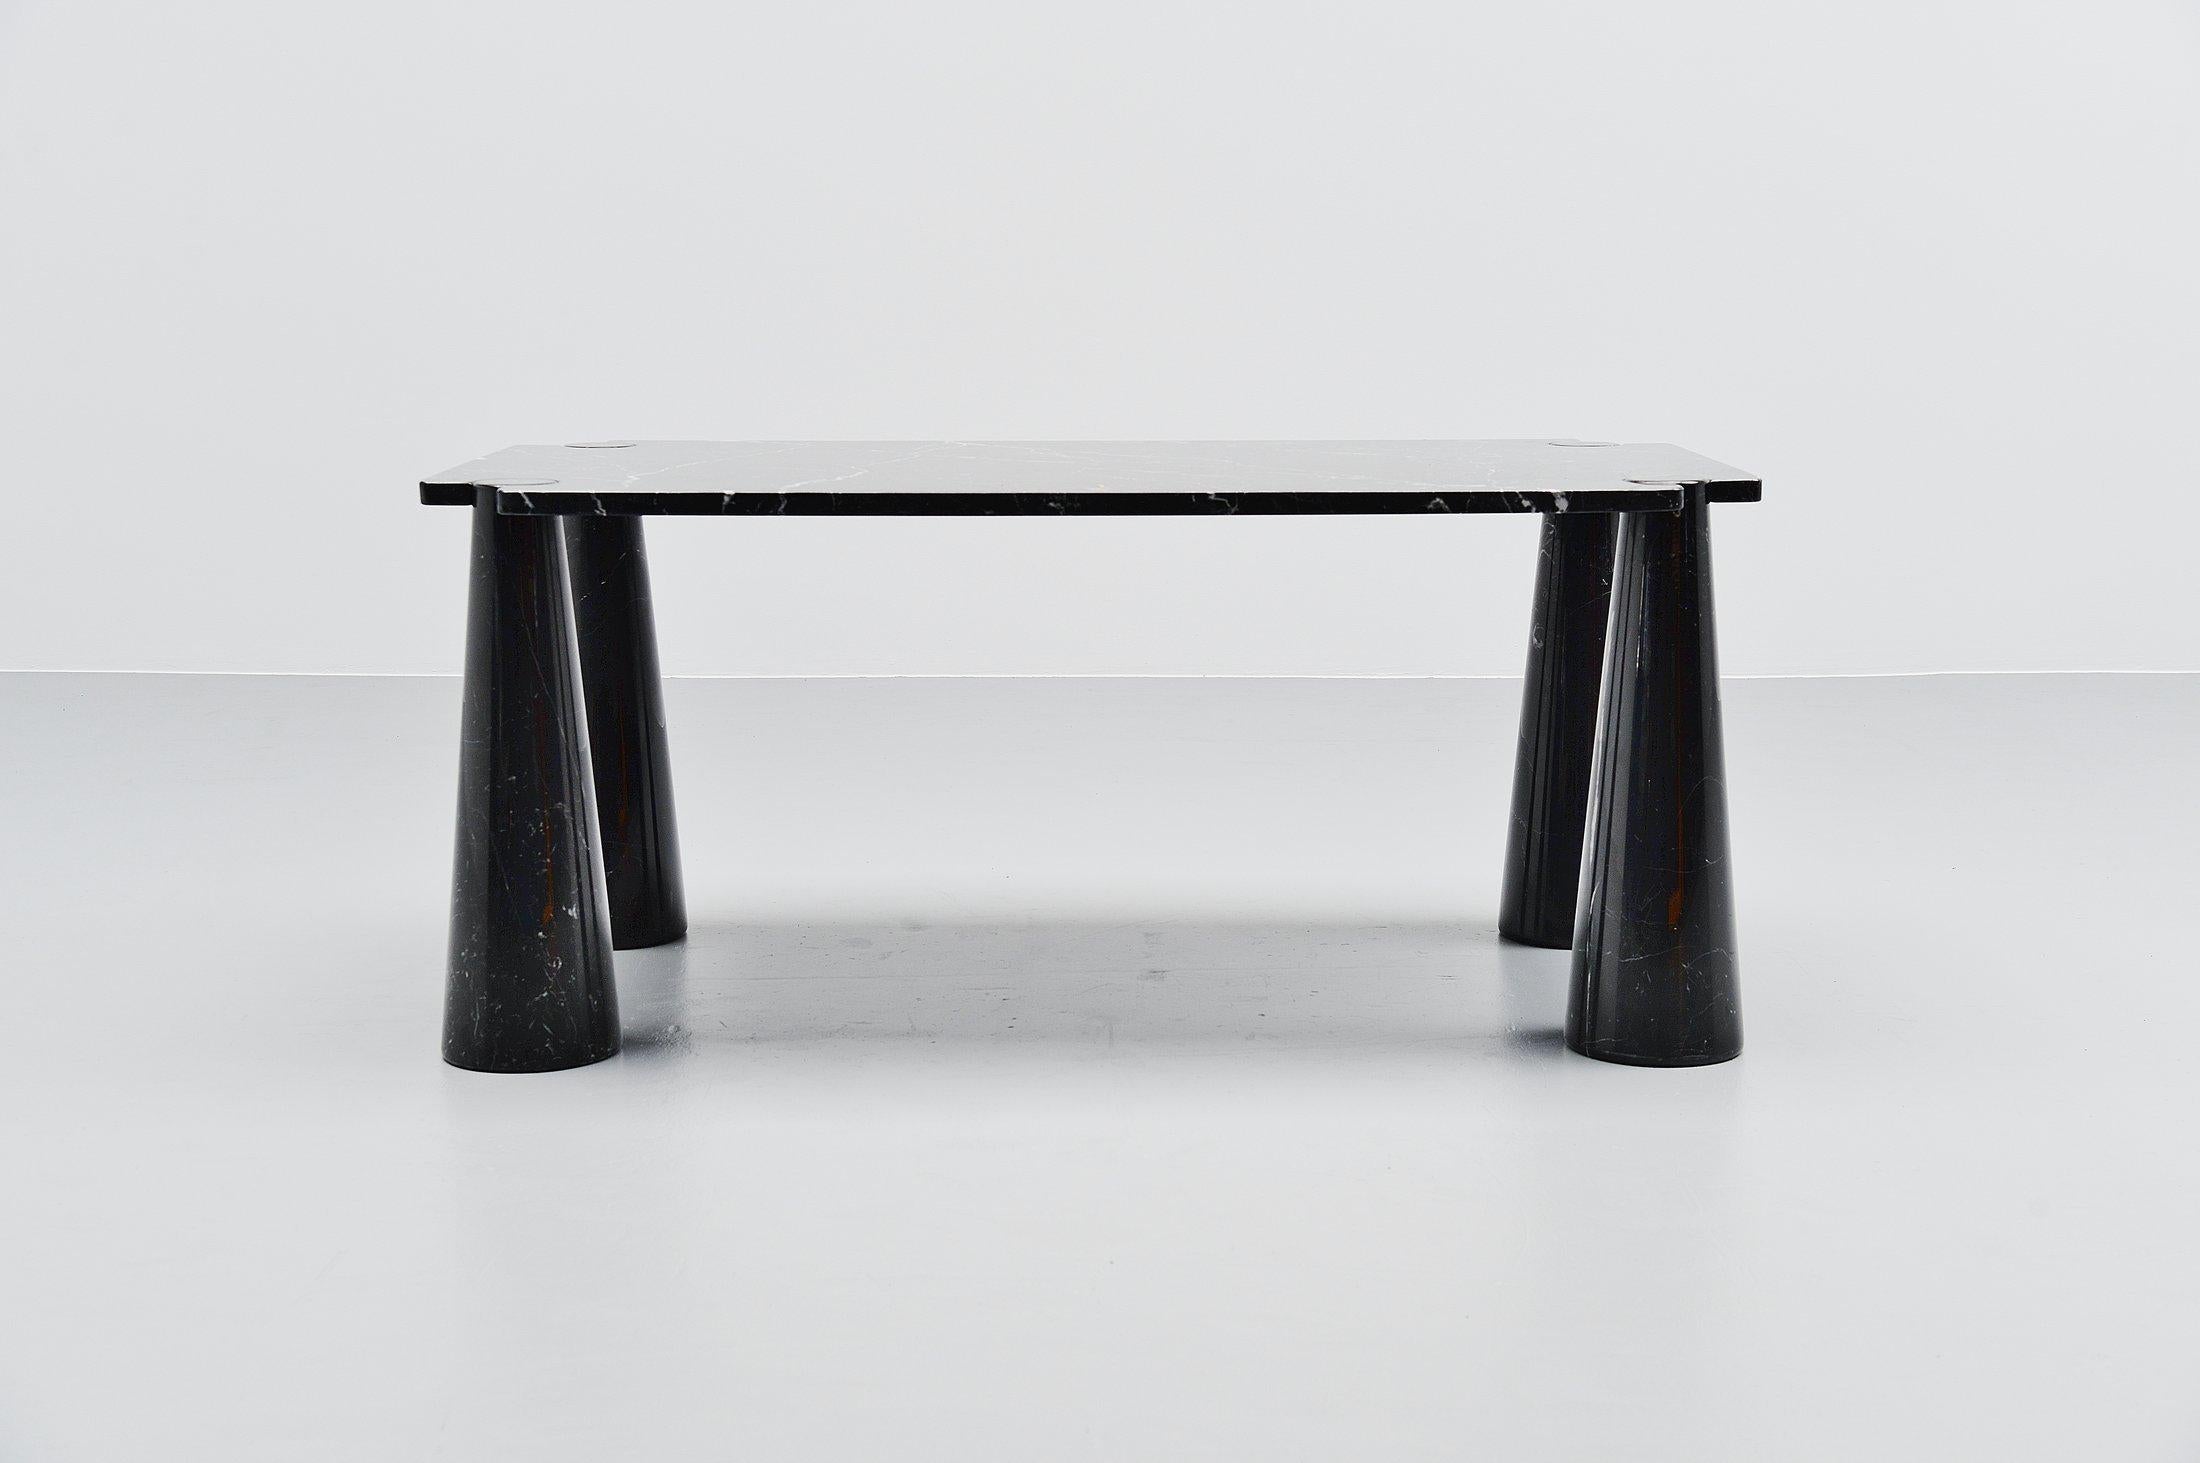 Spectacular ‘Eros’ dining table designed by Angelo Mangiarotti and manufactured by Skipper, Italy, 1971. This dining table is made of black marquina marble and has beautiful white veins running through the black marble. The dining table come from